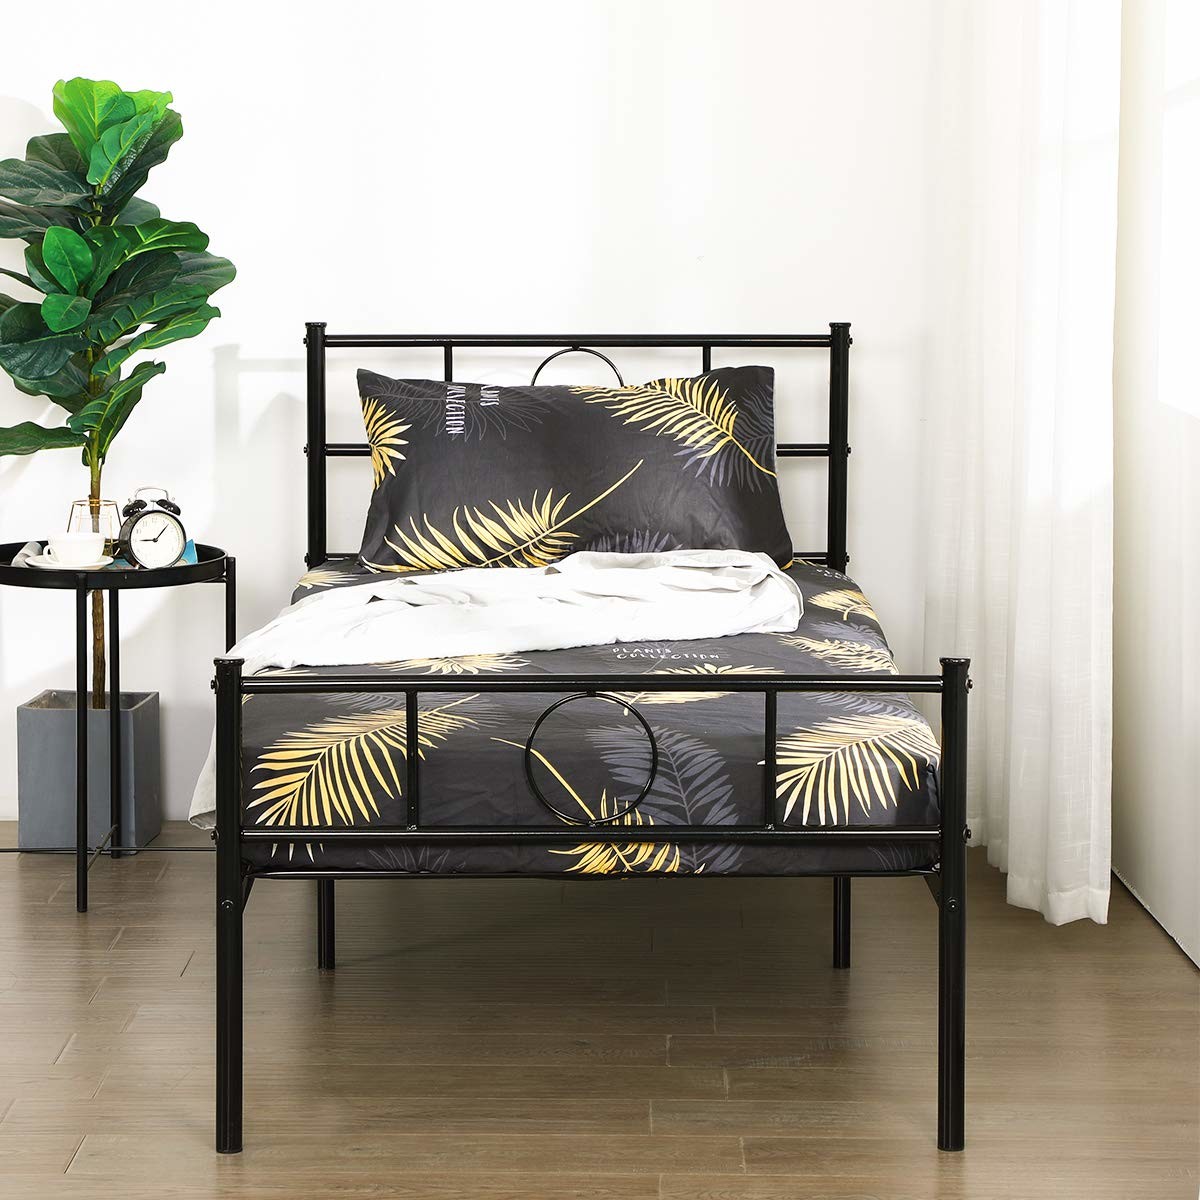 OEM Steel Furniture Bed Classic Design Easy Storage High Load Carrying Strength